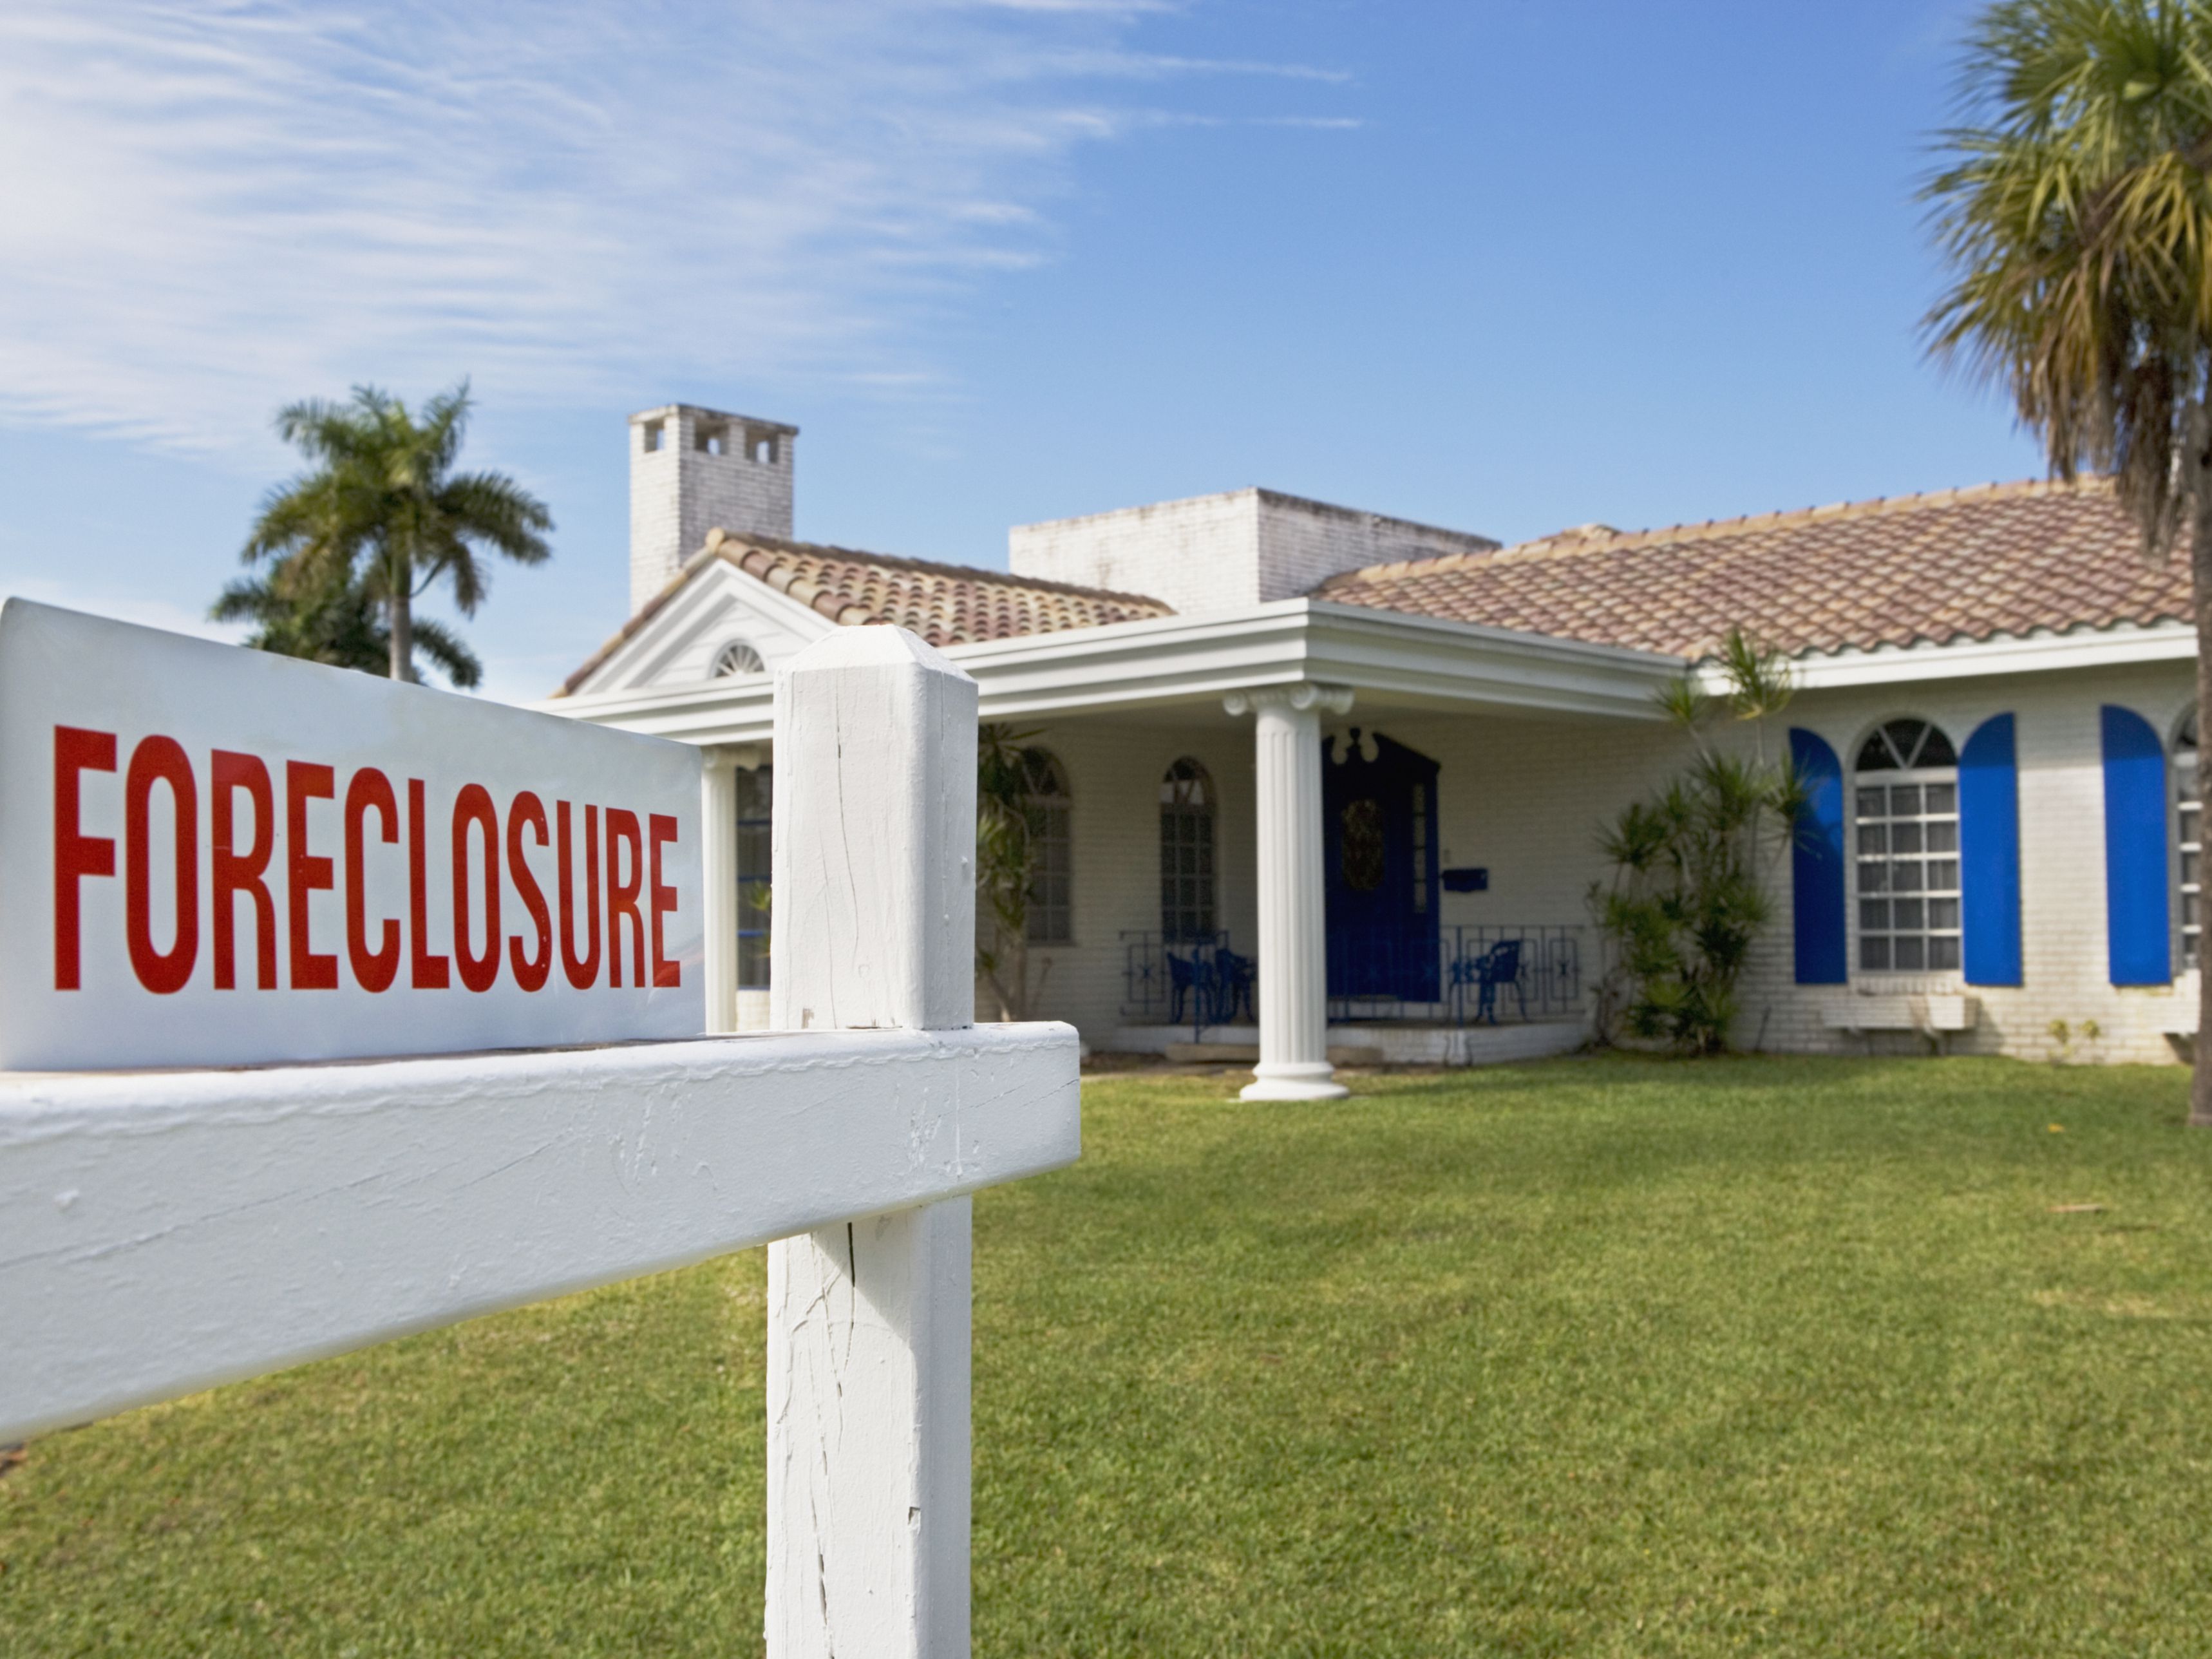 Stages of the Foreclosure Process